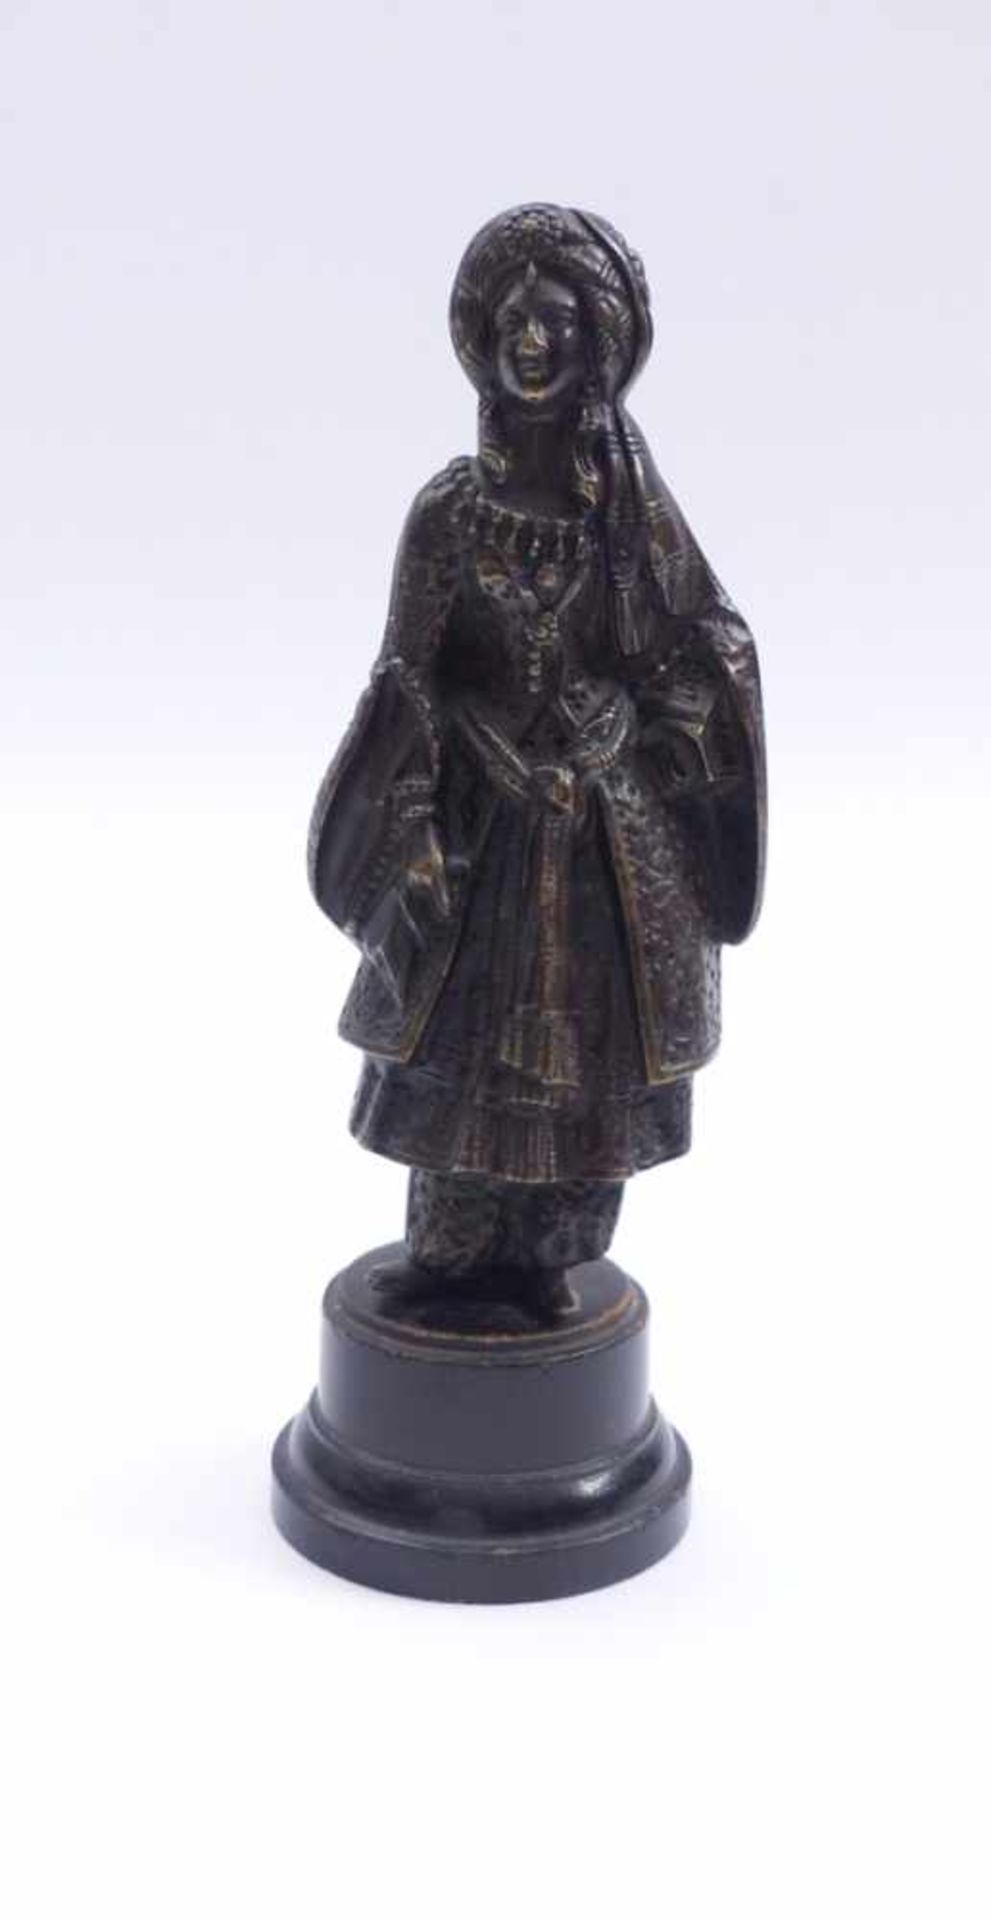 Oriental19th centuryA young woman in oriental costume standing on a round, profiled pedestal as a